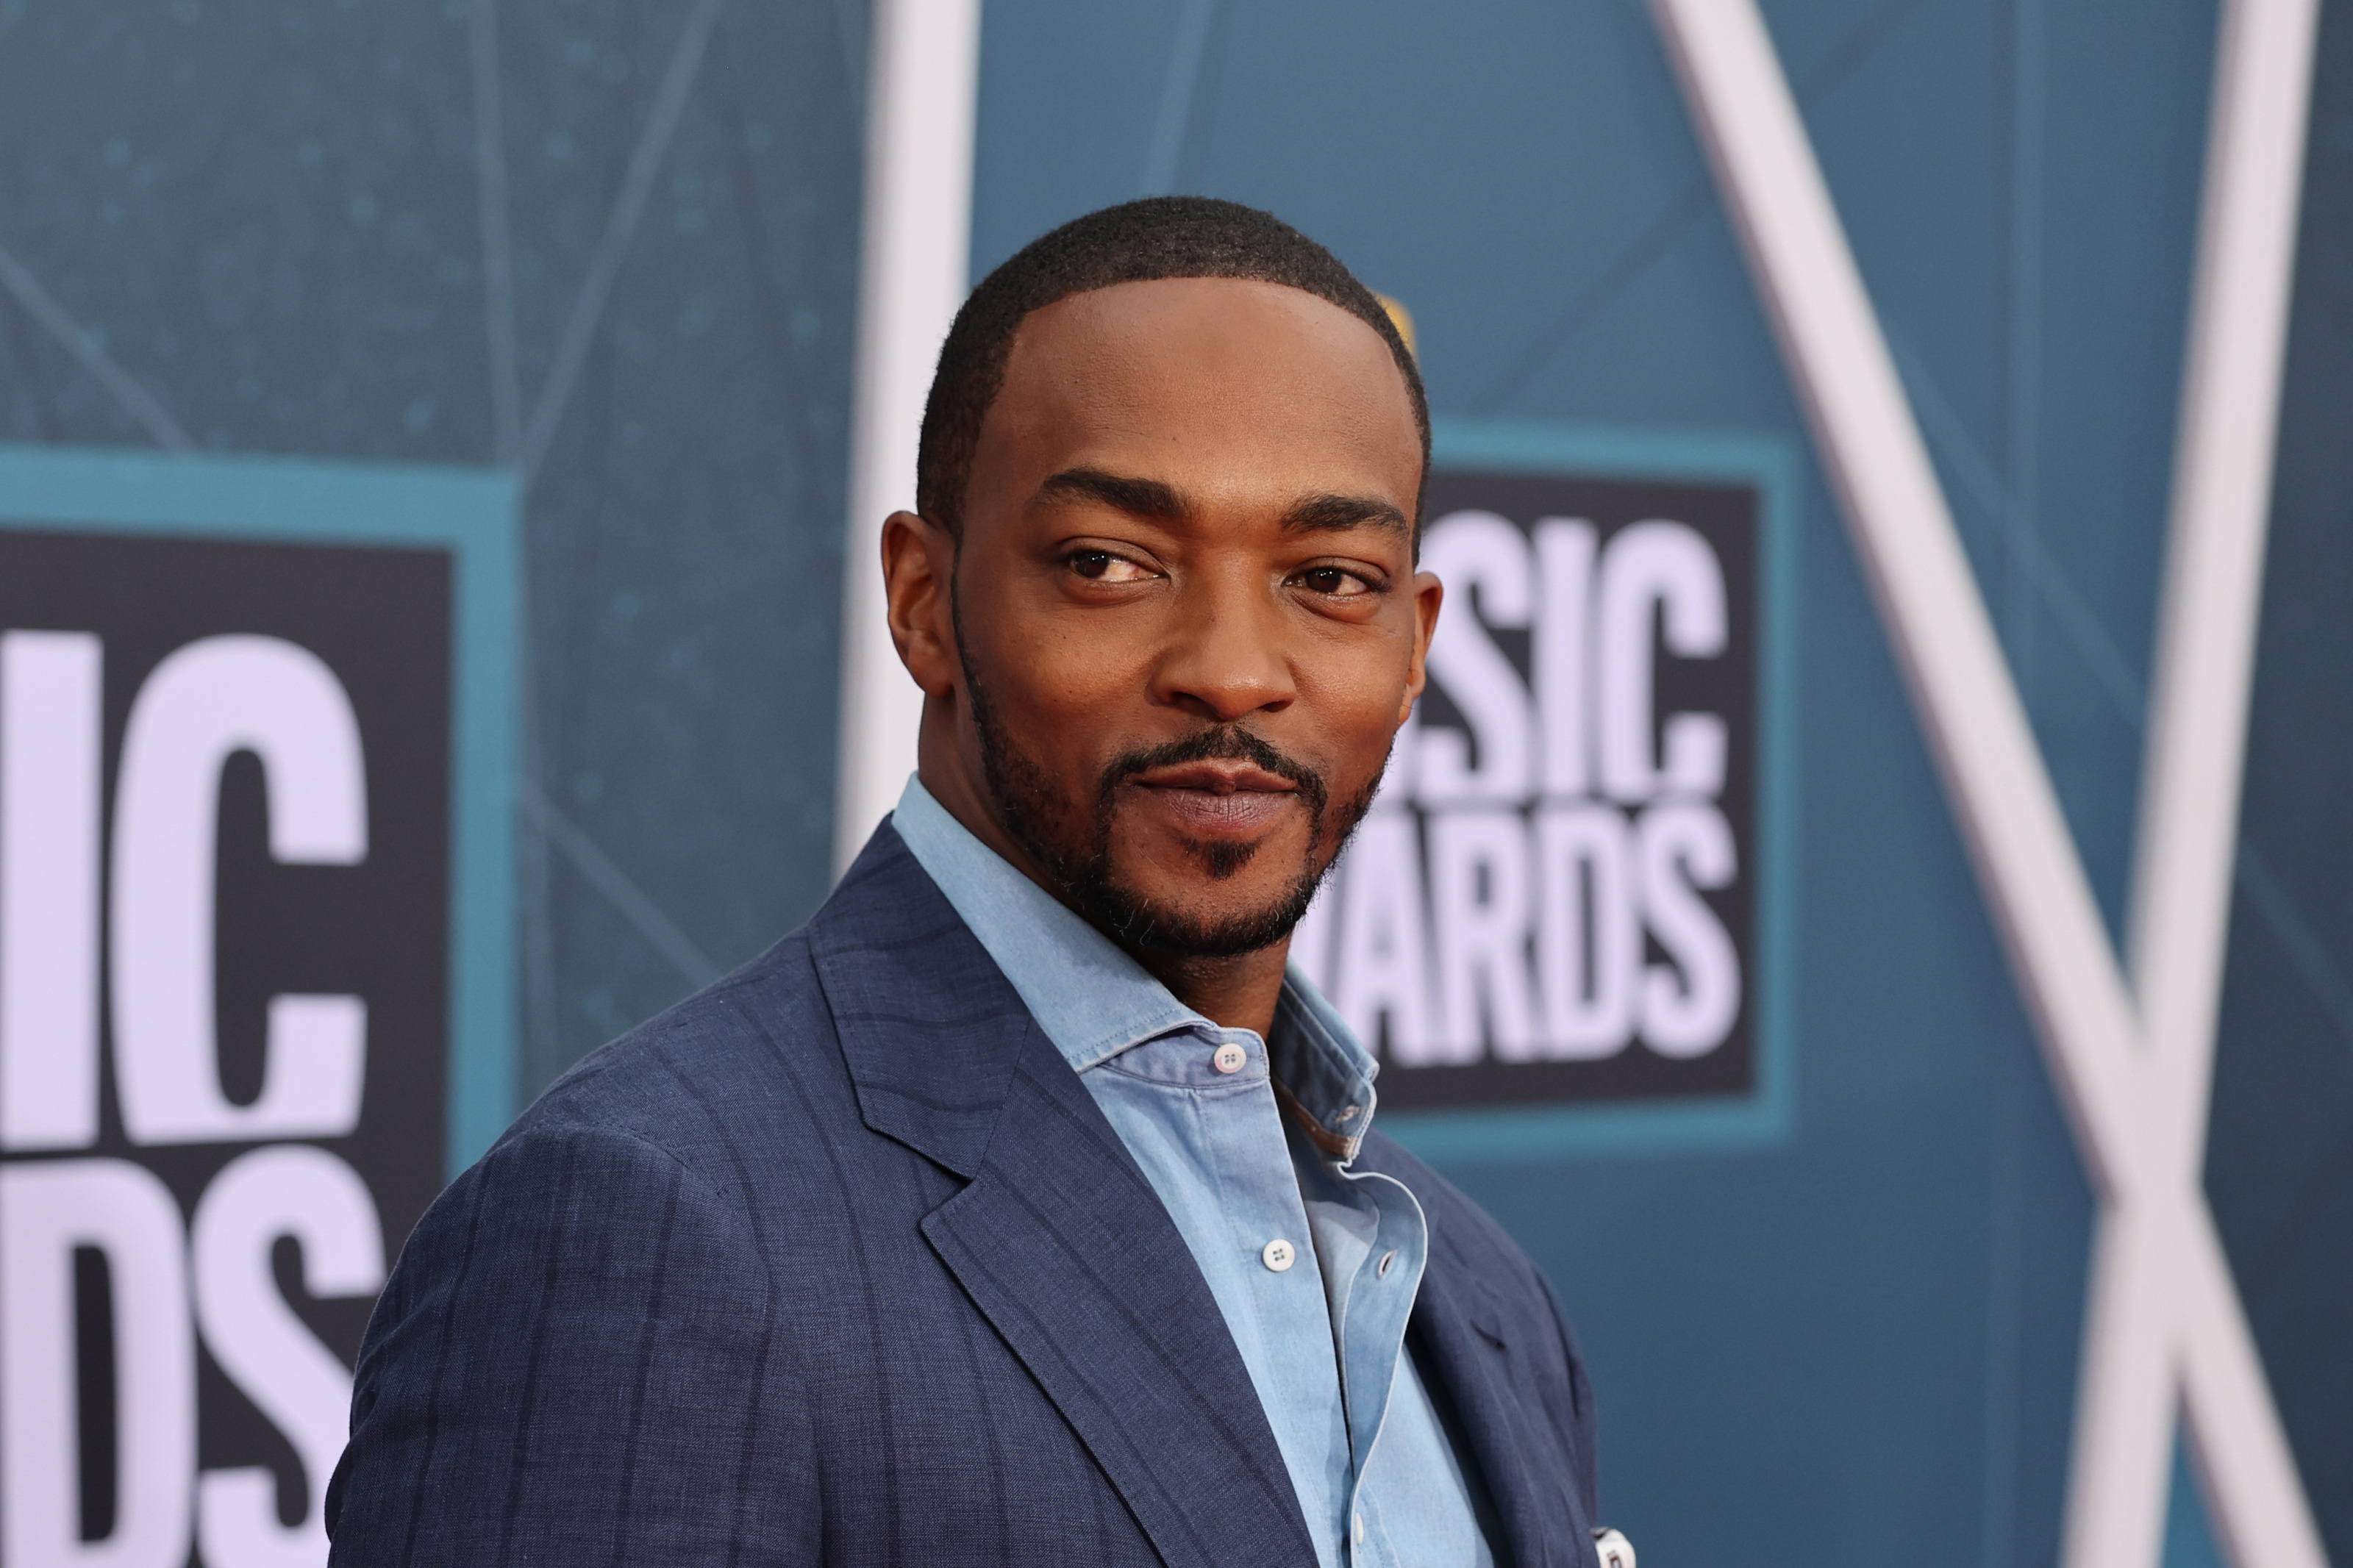 Twisted Metal TV Show, Starring Anthony Mackie, To Premiere on Peacock